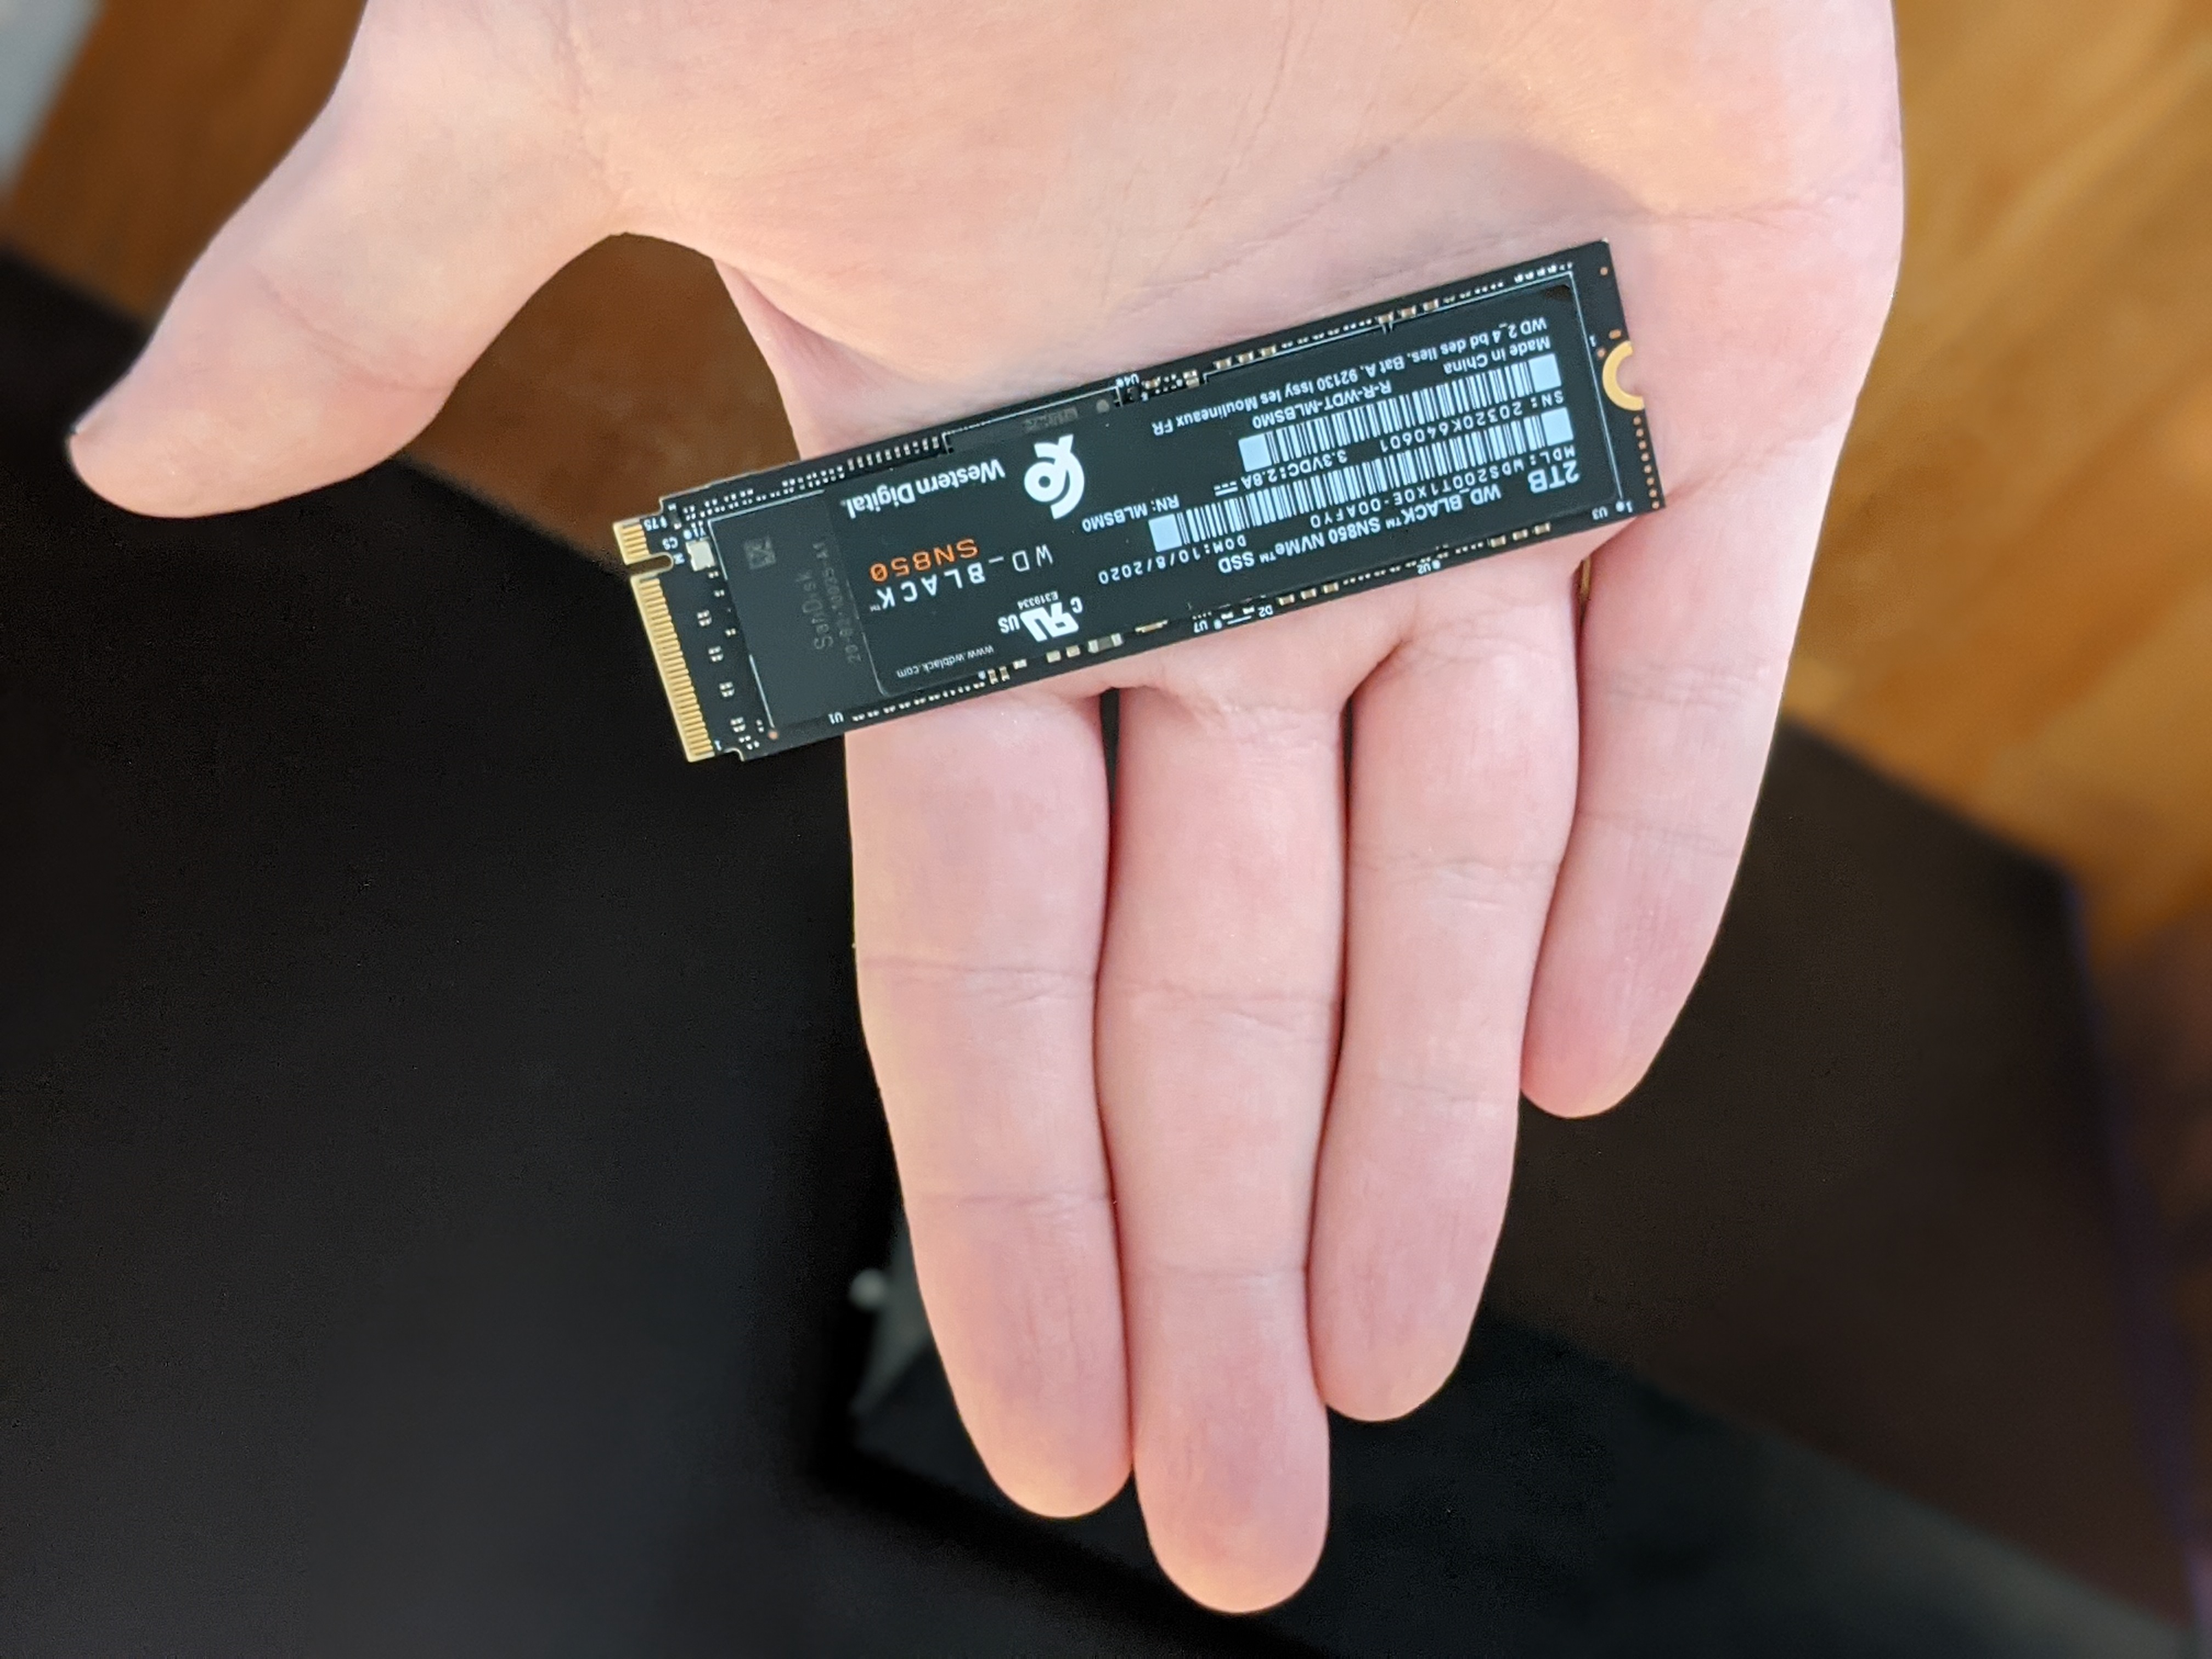 How to install an M.2 SSD